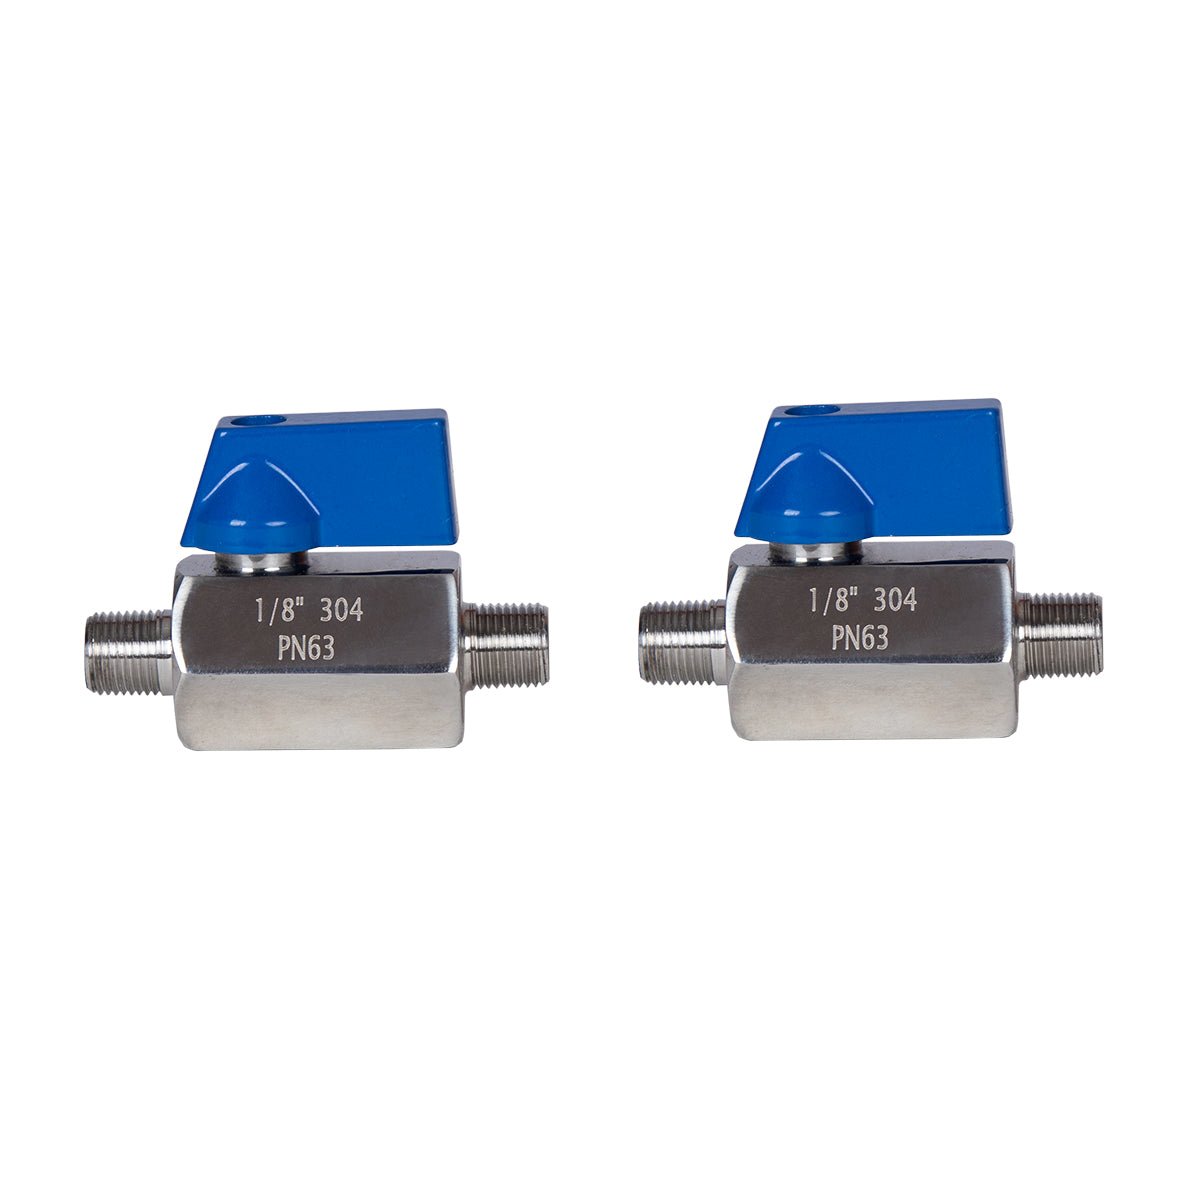 Stainless Steel Mini Ball Valve 1/8" 1/4" 1/2" NPT Male to male Connection ( Pack of 2) - JIVTO